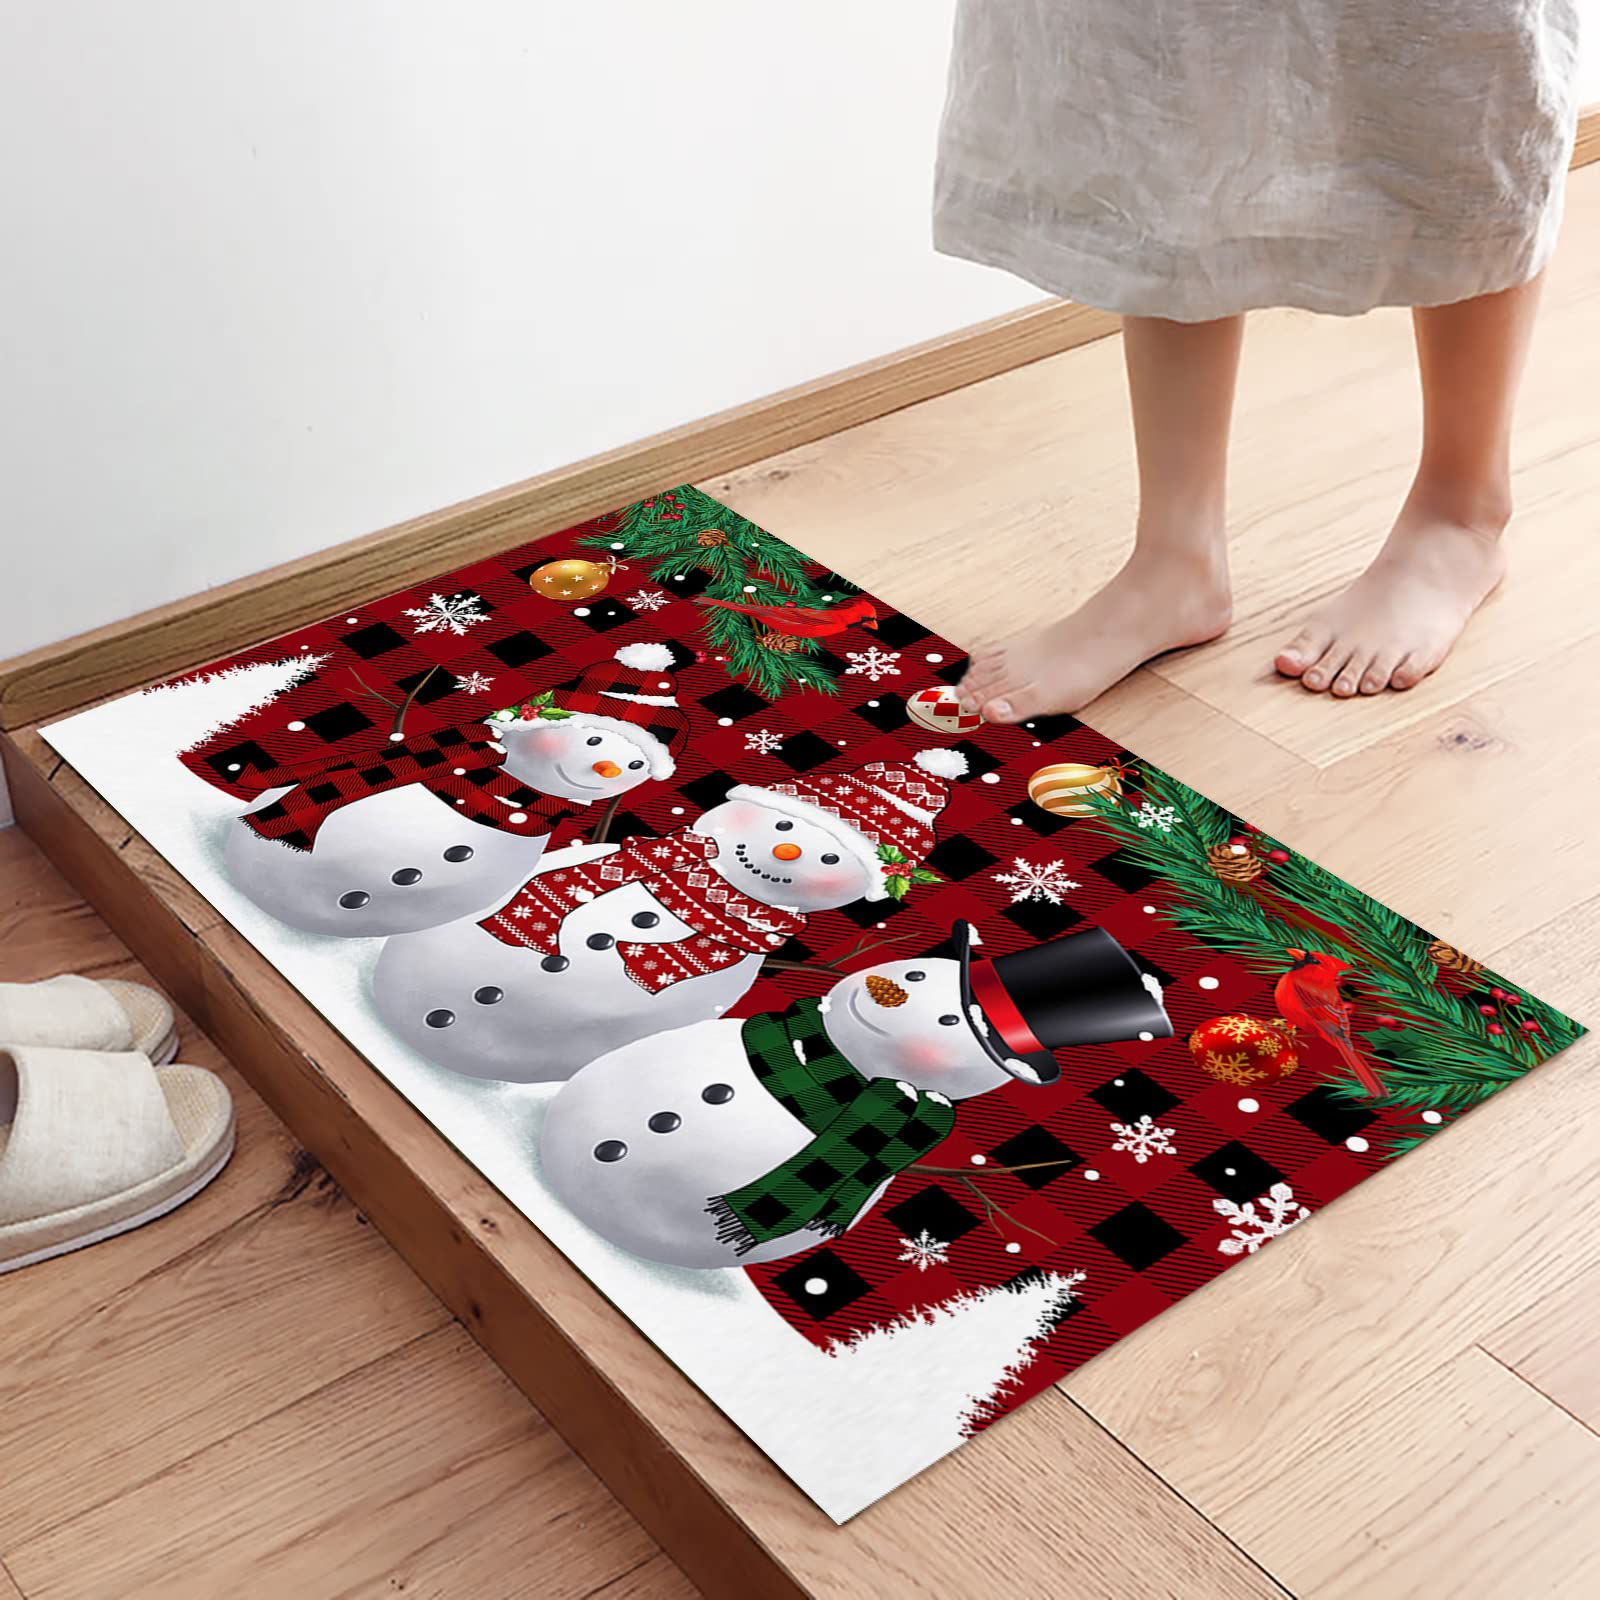 Christmas Kitchen Mats 2 Piece, Xmas Snowman Winter Holiday Doormats, Snowflake Kitchen Rugs Set Black Red Buffalo Plaid Christmas Decorations Floor Mat for Indoor Use,15.7" x 23.6"+15.7" x 47.2"